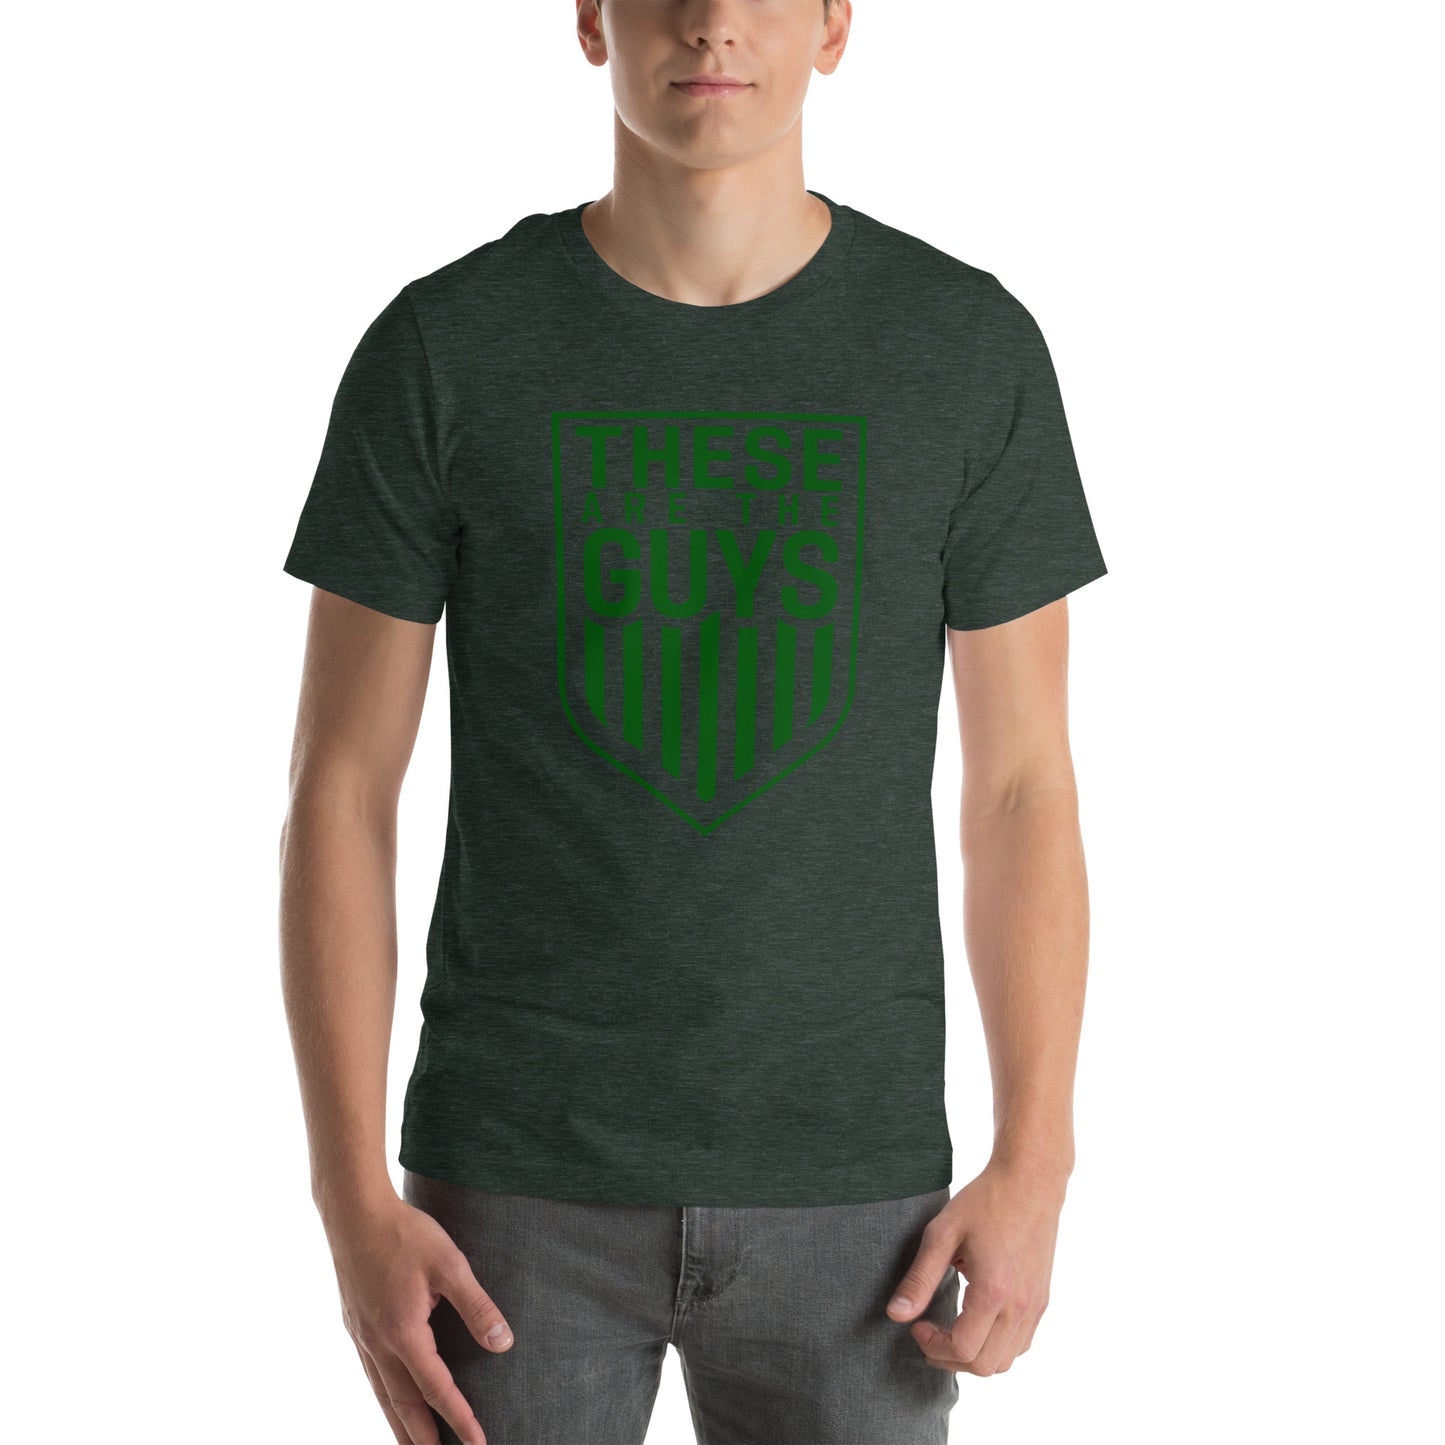 These are the Guys (t-shirt) - Freedom's Field Green